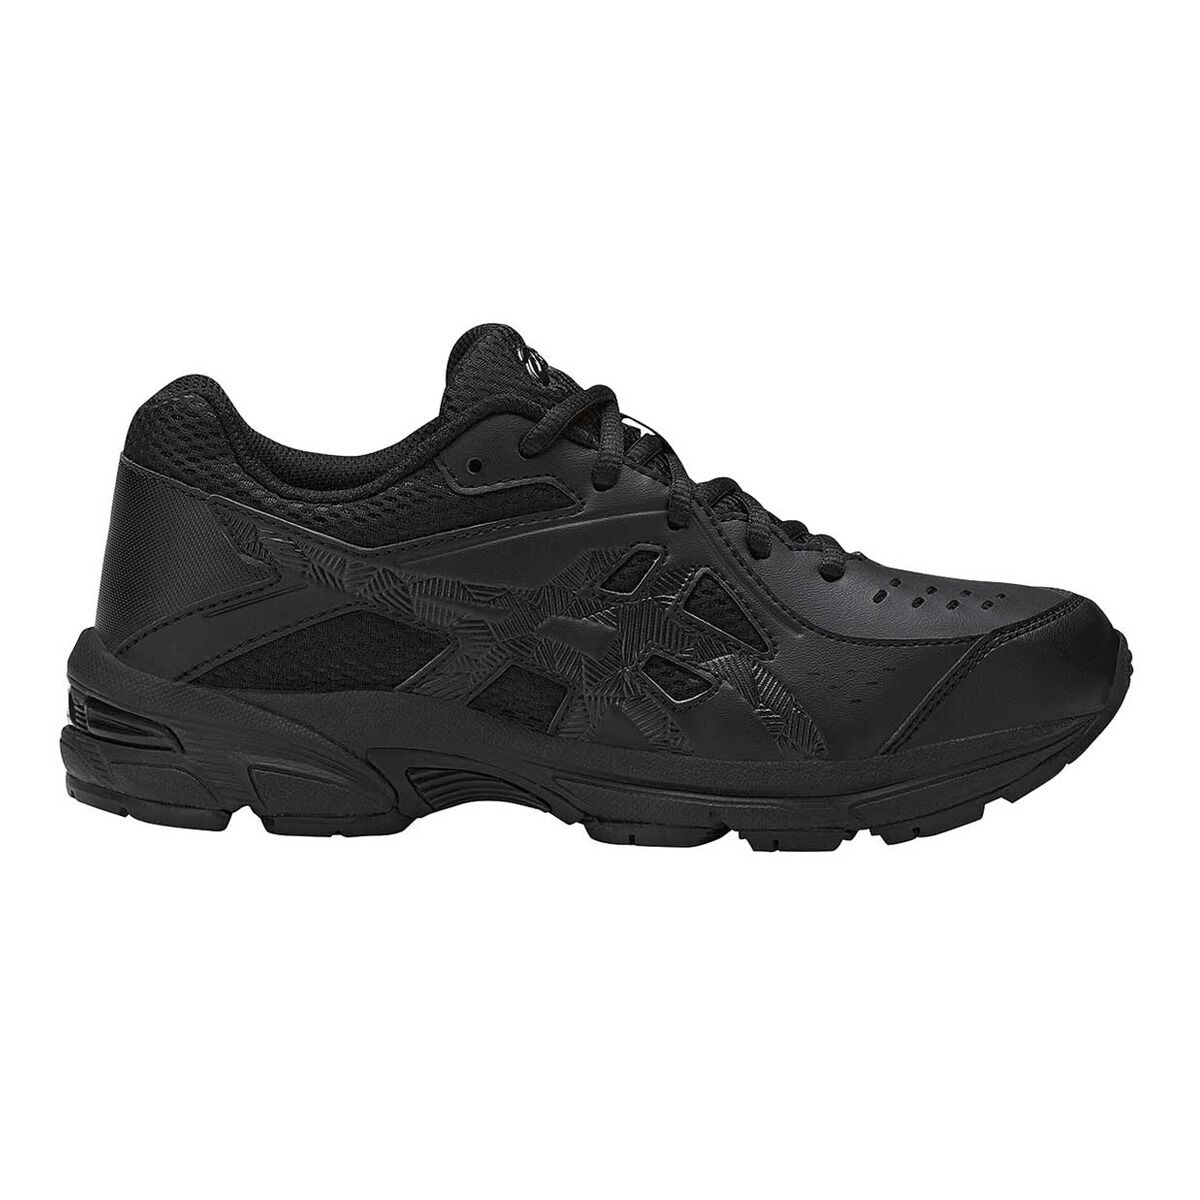 all black leather running shoes